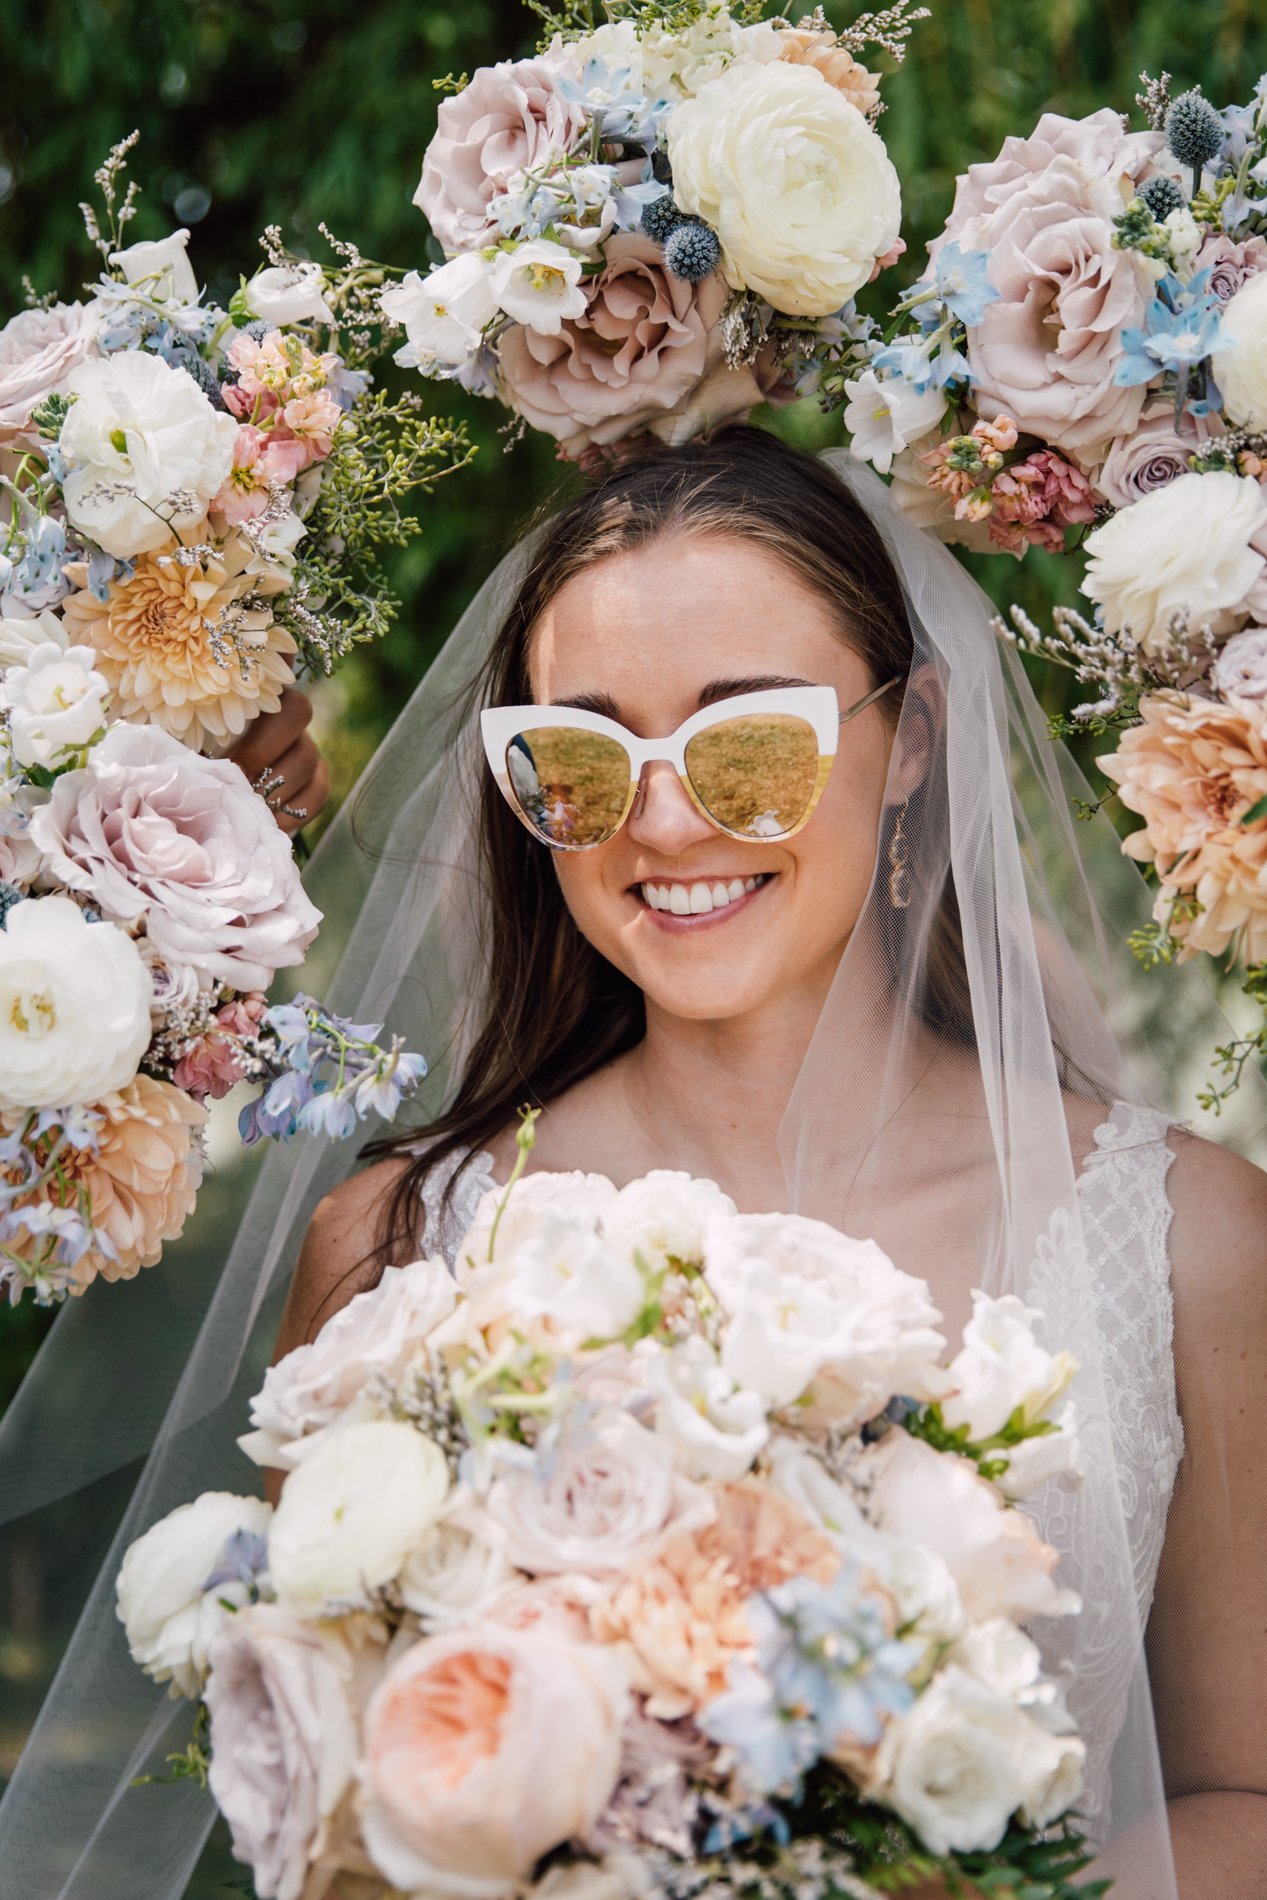  Bride wears sunglasses while bridesmaids hold their bouquets around her head 